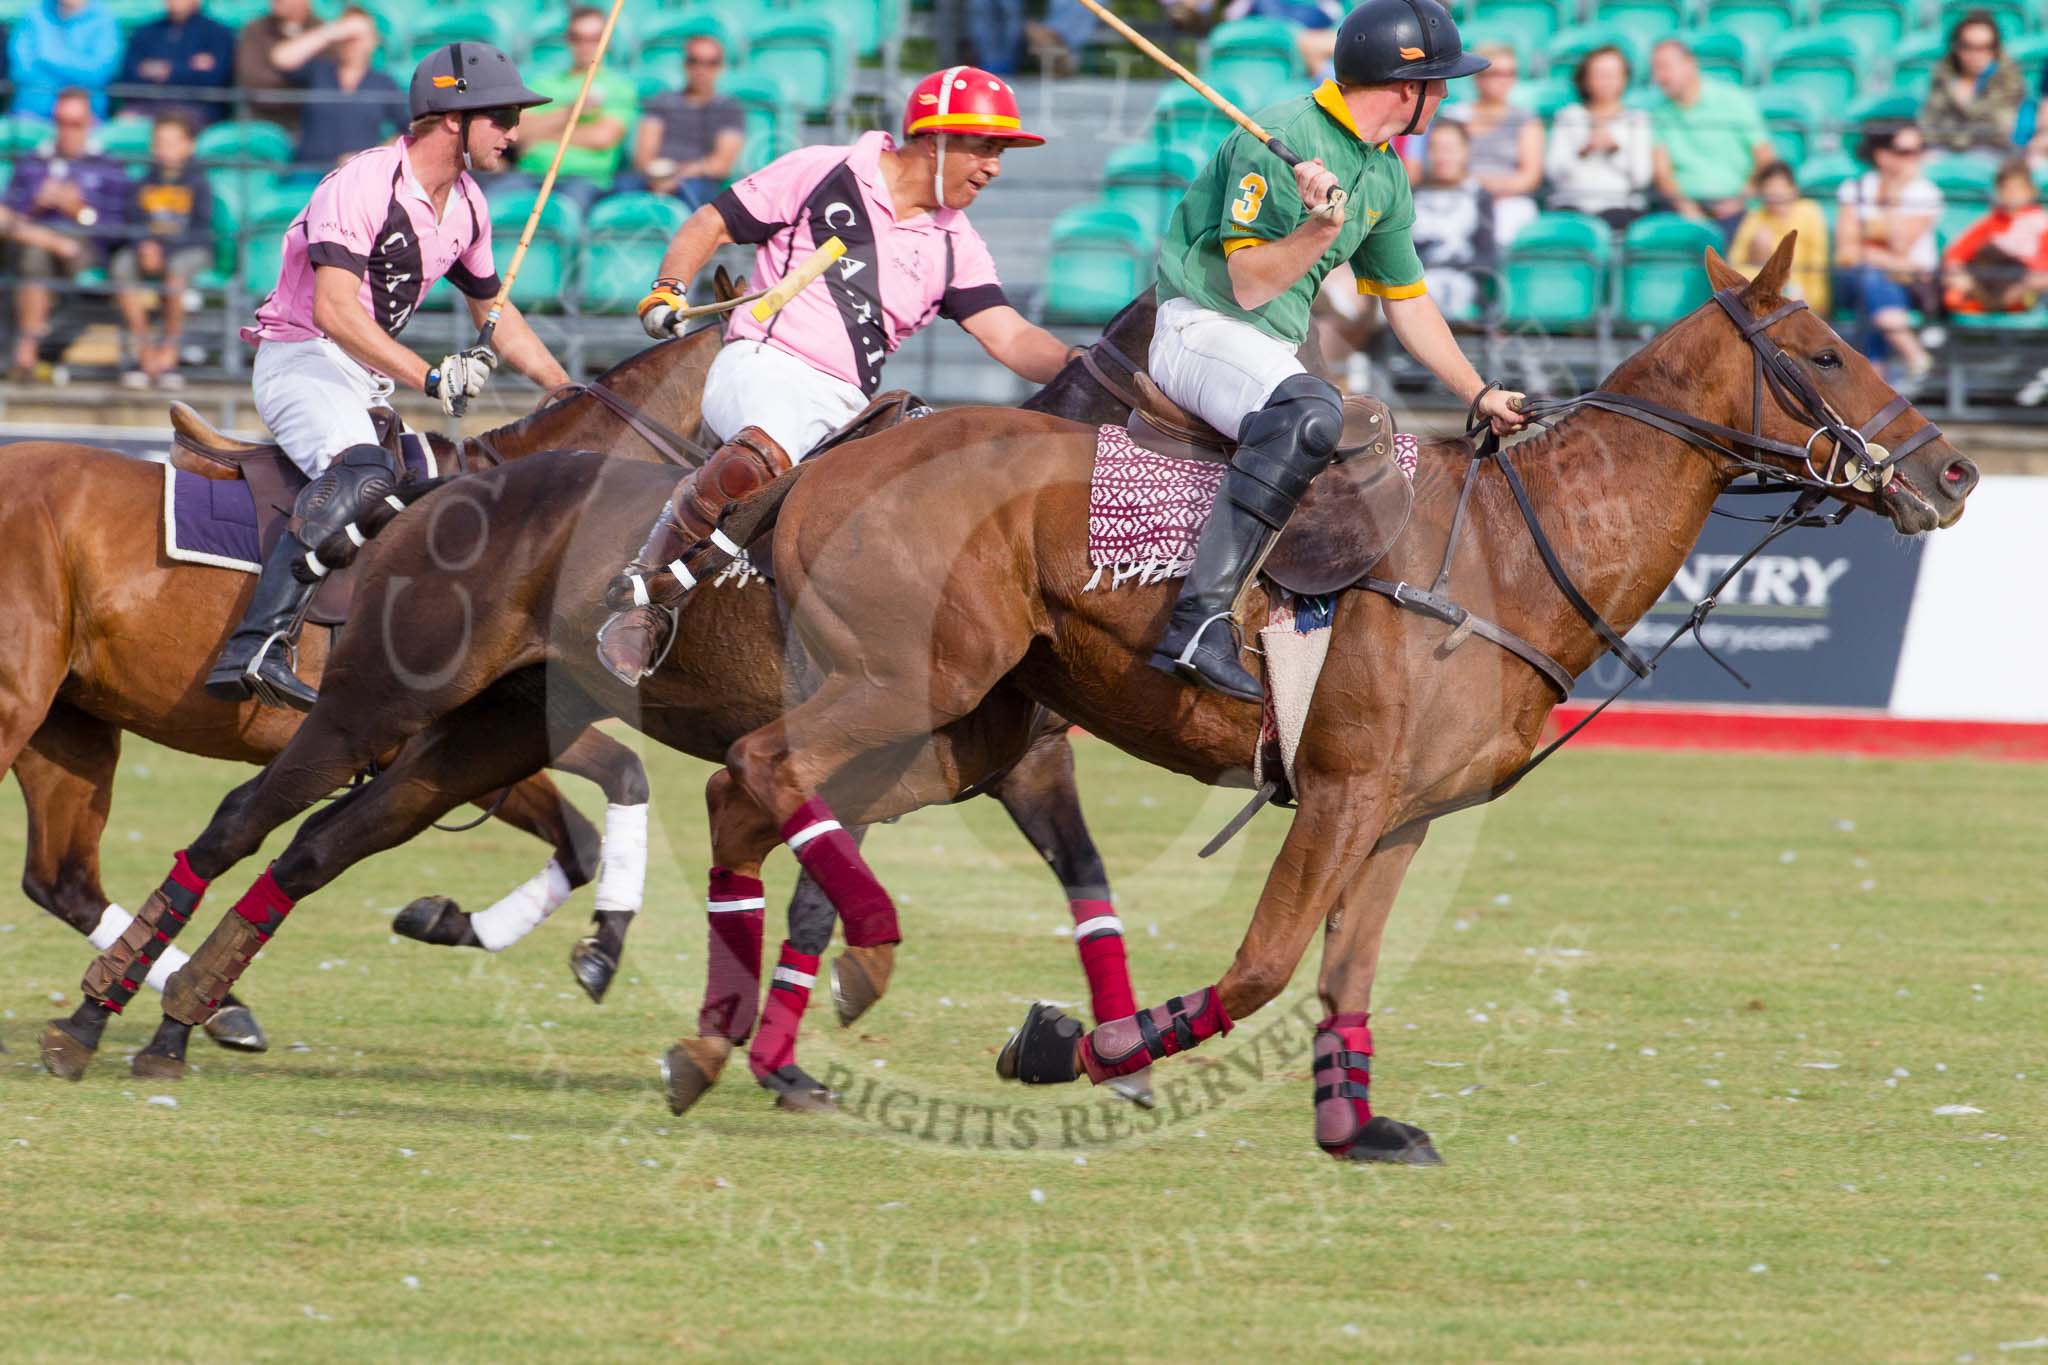 DBPC Polo in the Park 2013, Final of the Tusk Trophy (4 Goals), Rutland vs C.A.N.I..
Dallas Burston Polo Club, ,
Southam,
Warwickshire,
United Kingdom,
on 01 September 2013 at 16:55, image #622